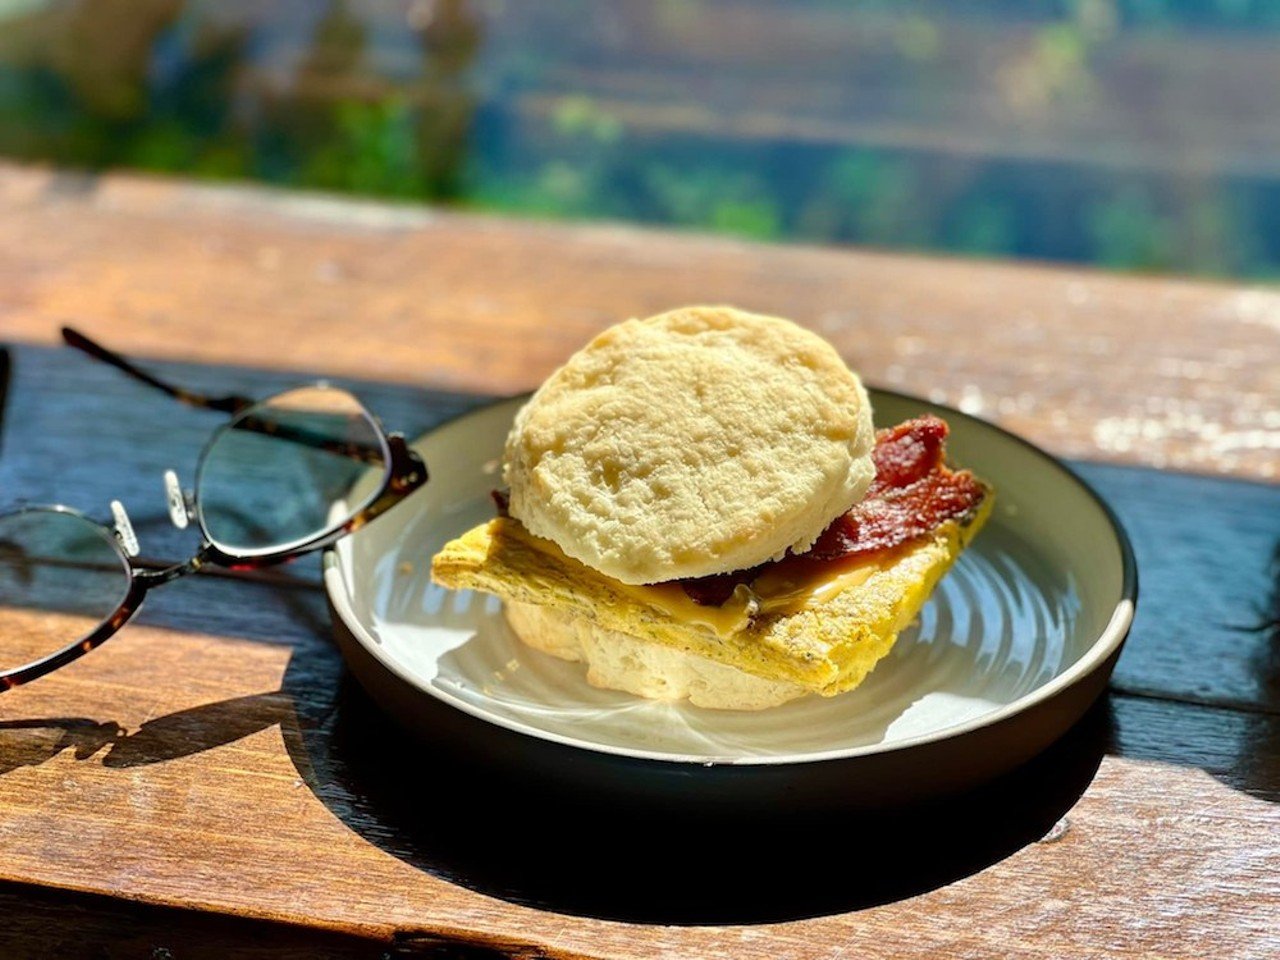 Butchertown Grocery Bakery
743 E. Main St.
Butchertown Grocery Bakery is nestled near Market Street with all the pastries and breakfast sandwiches you could want.
Featured in the photo is a bacon, egg and cheese biscuit with applewood smoked bacon and chive aioli.
